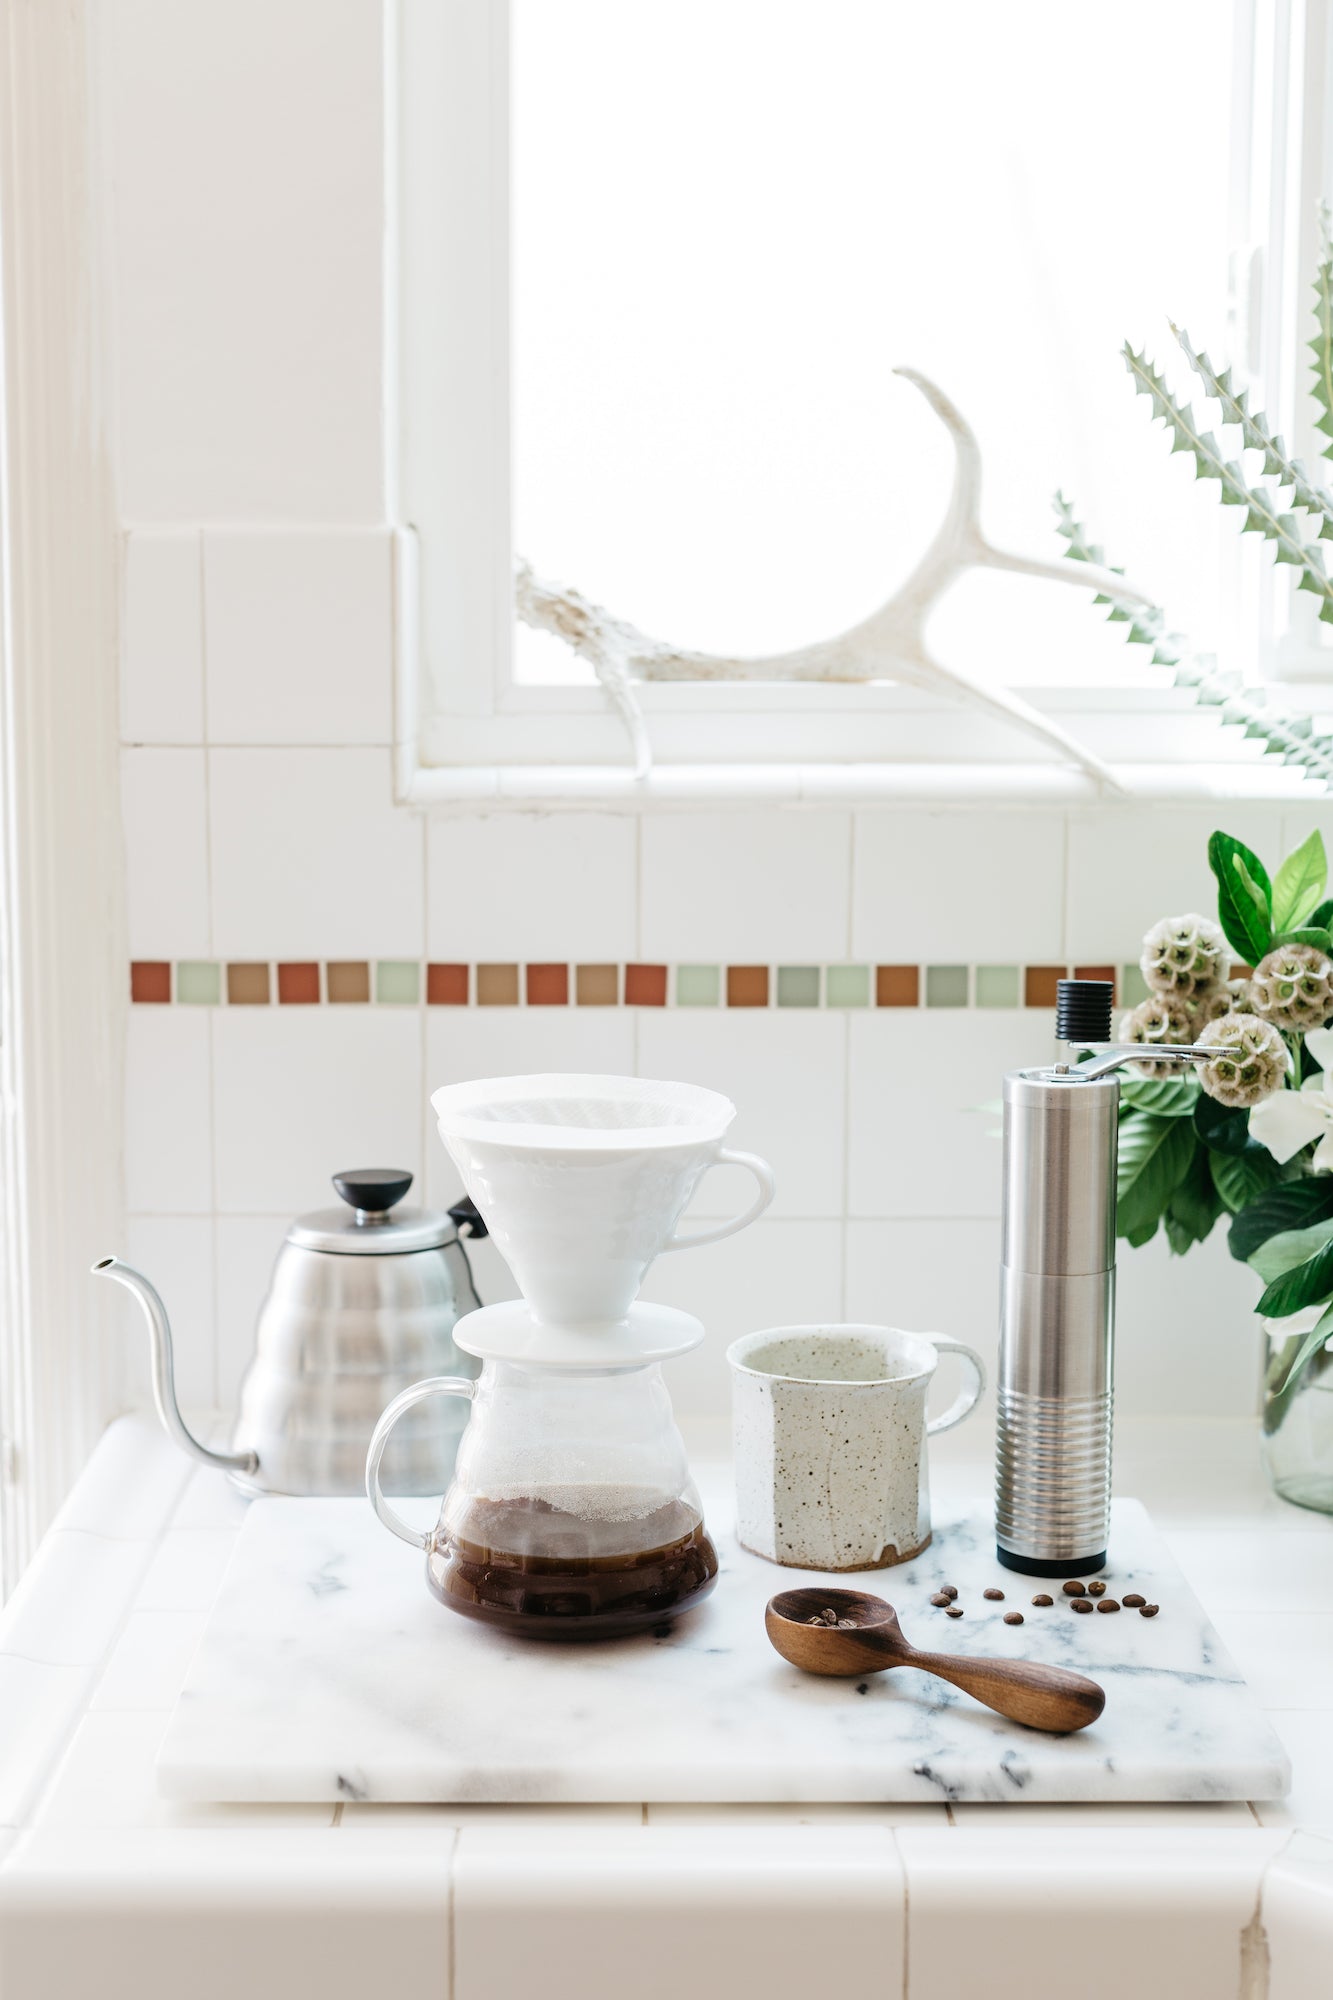 Walnut coffee spoon on counter with coffee beans. By Melanie Abrantes Designs.